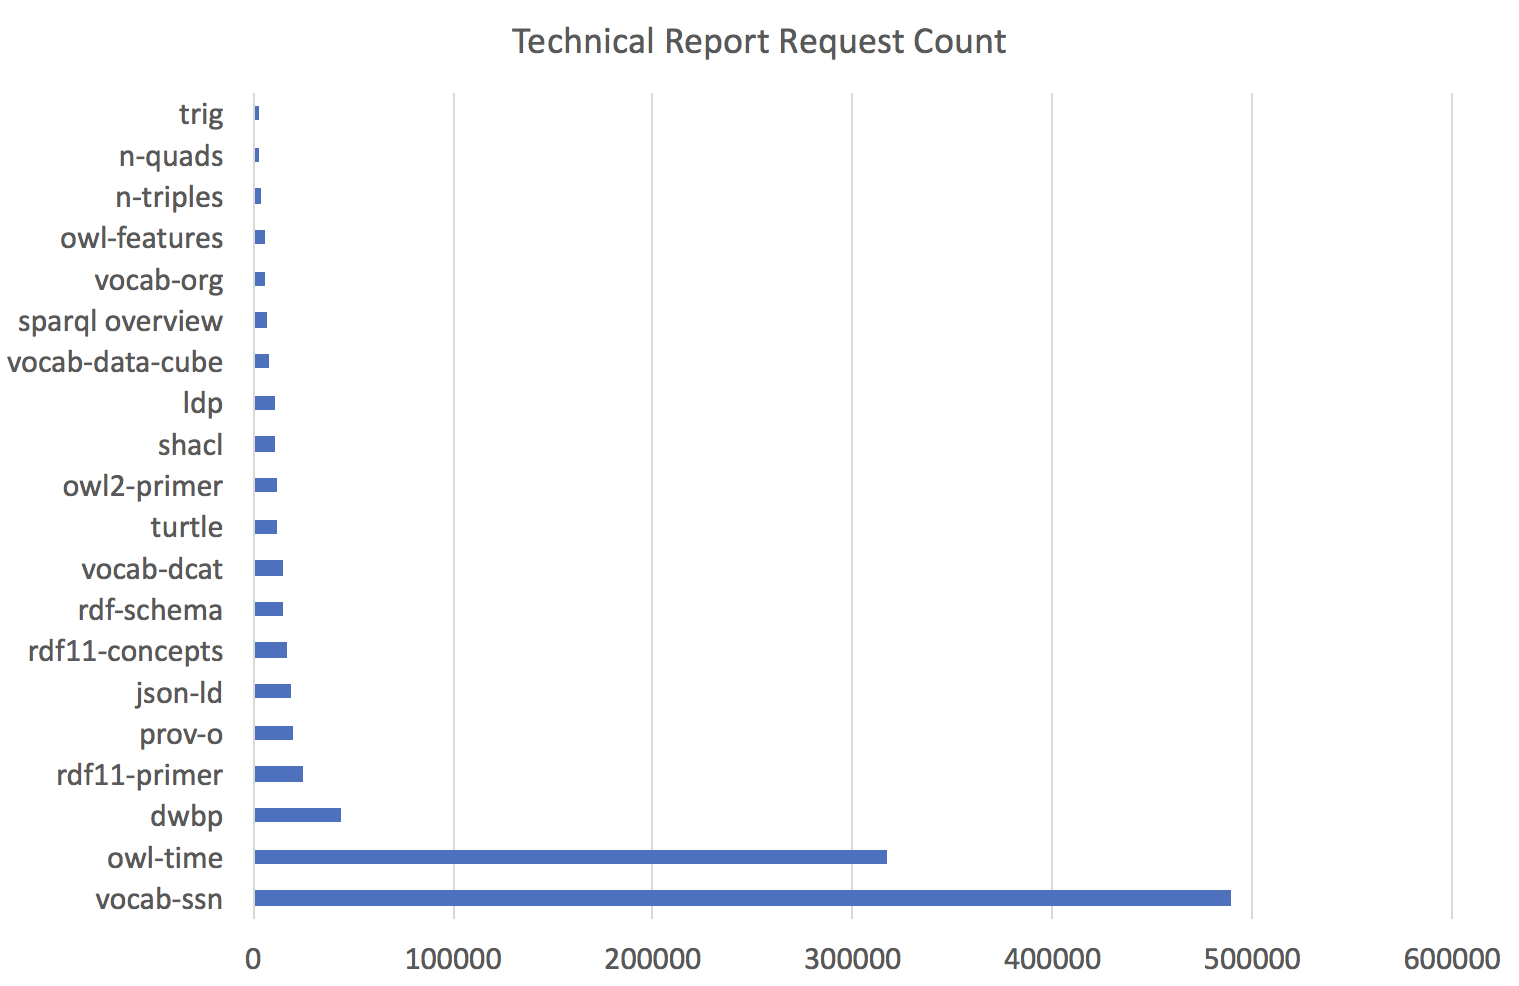 Technical Report Request Count for one quarter